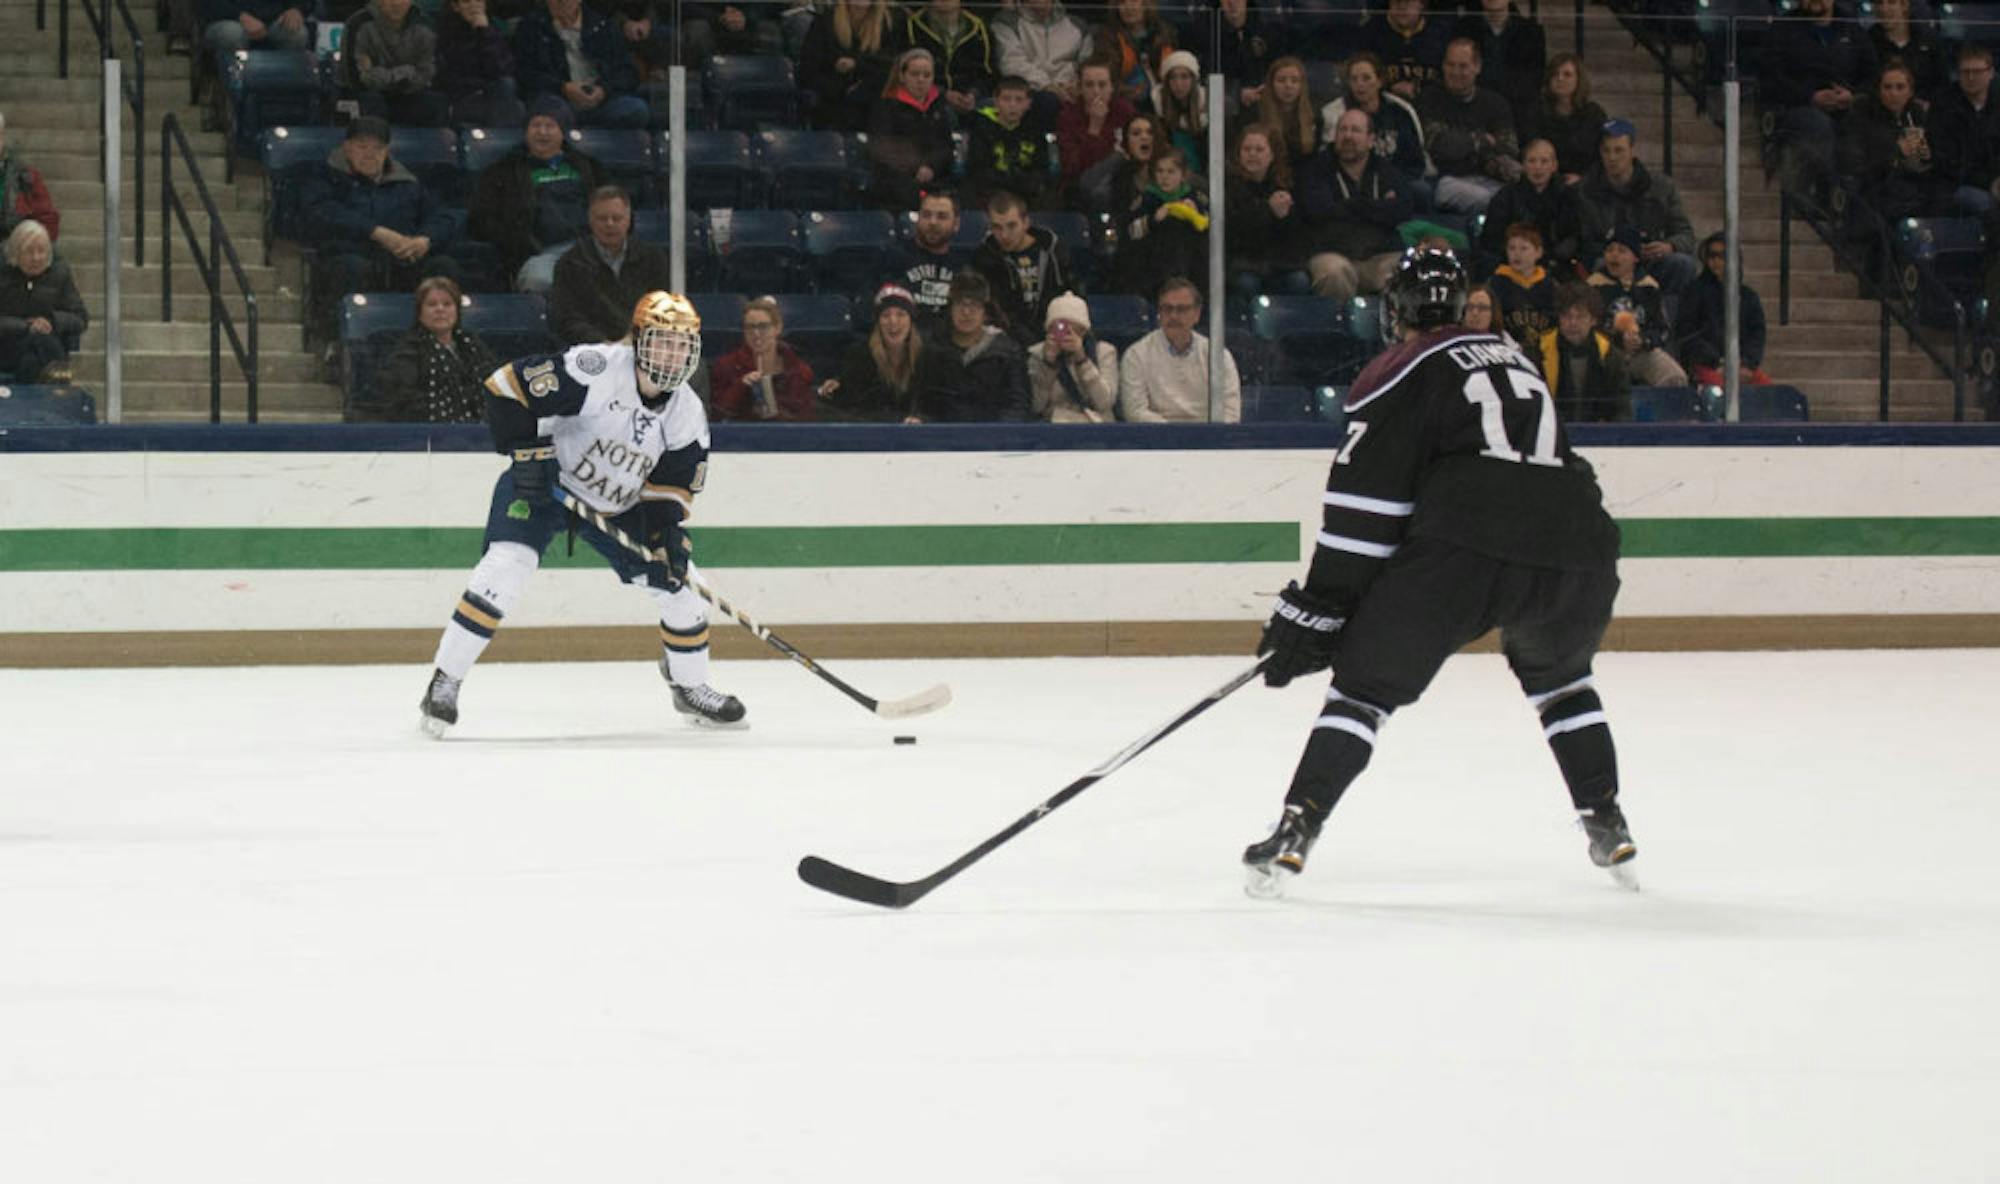 Irish freshman center Connor Hurley looks to pass to a teammate during Notre Dame’s 3-2 overtime loss to Union College on Nov. 28 at Compton Family Ice Arena. Hurley has three goals and seven assists this year.